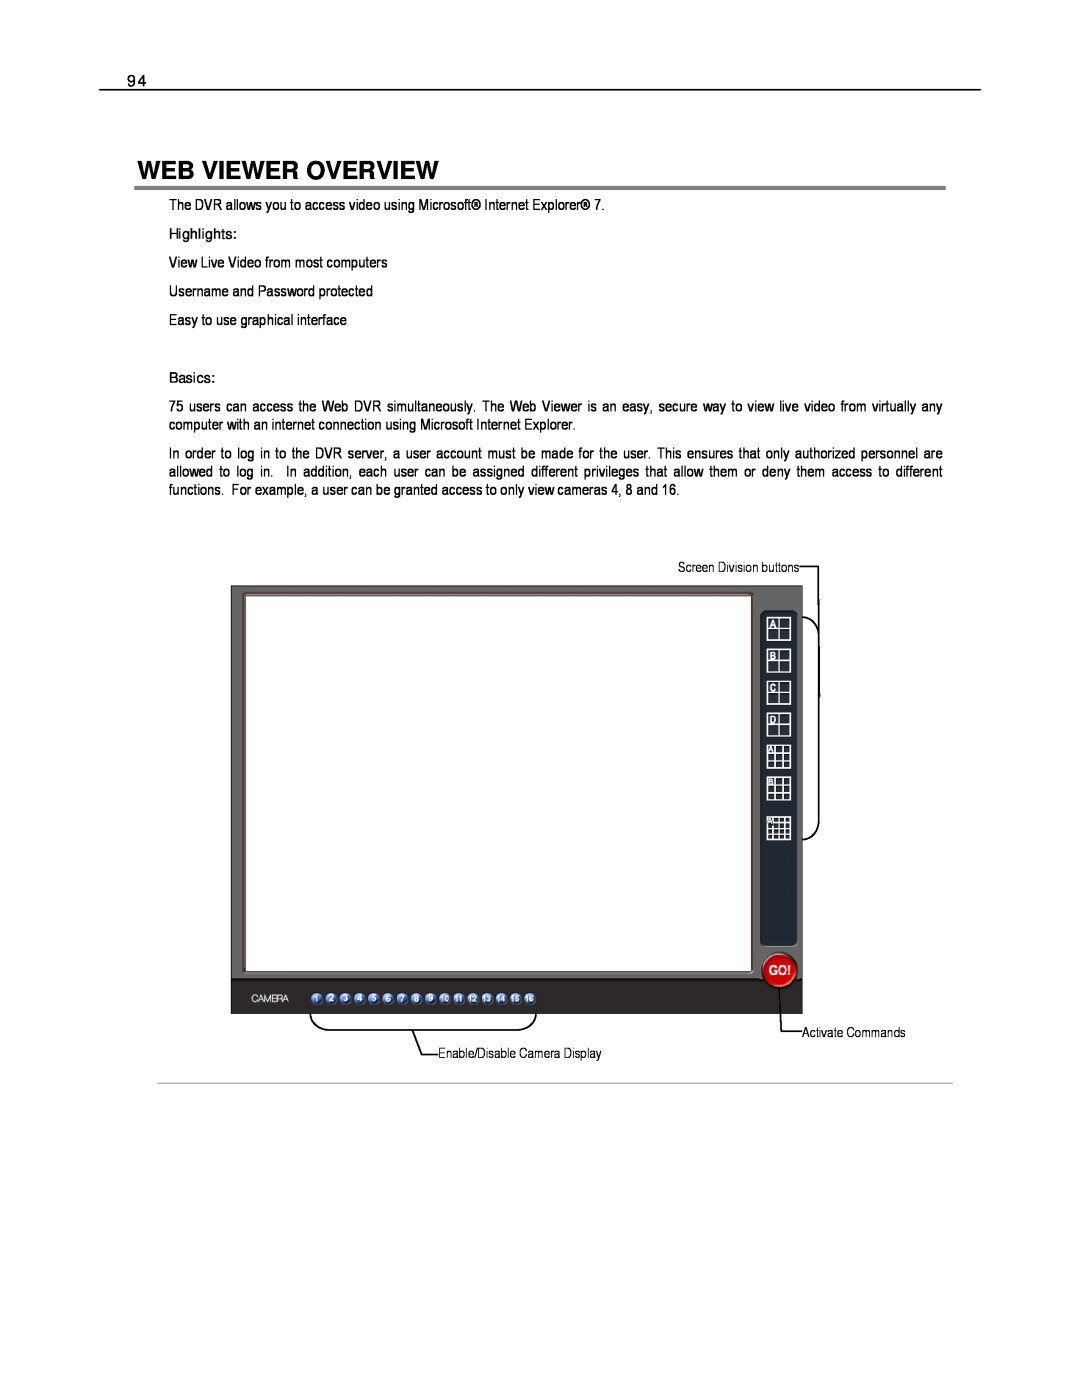 Toshiba HVR16-X, EVR8-X, EVR32-X, HVR32-X, HVR8-X, EVR16-X user manual Web Viewer Overview, Highlights, Basics 